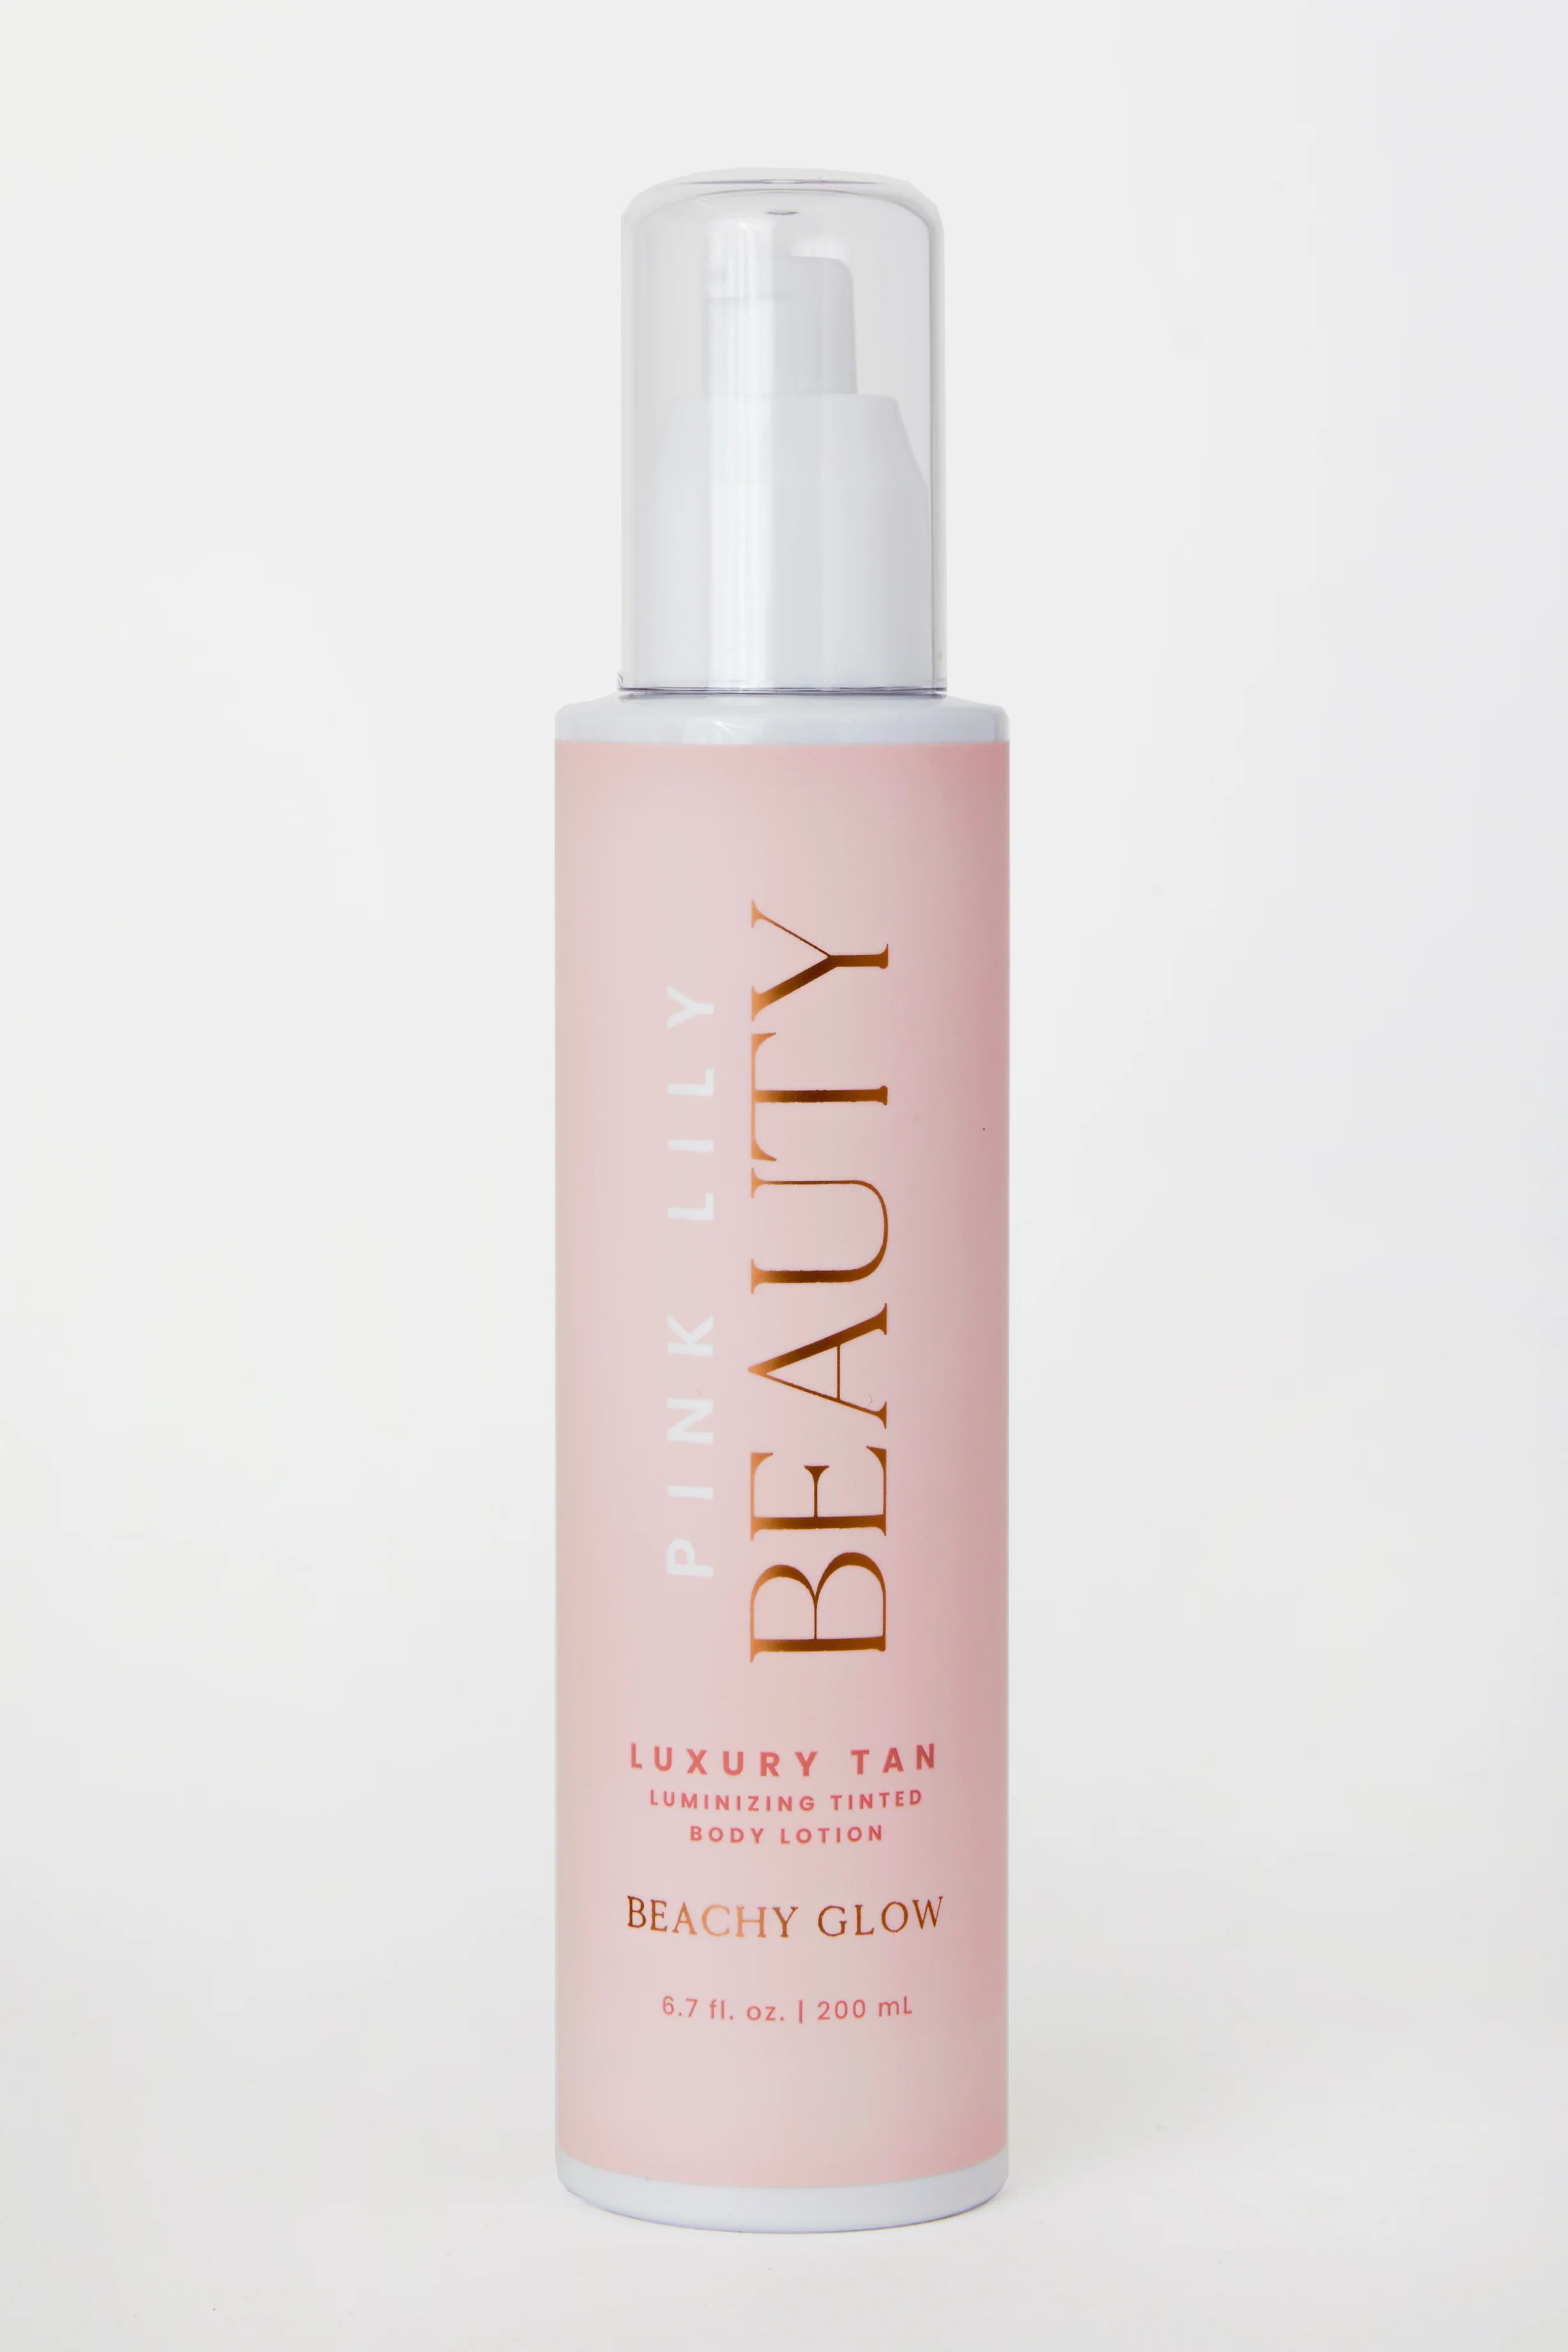 Pink Lily Luxury Tan Luminizing Body Lotion - Beachy Glow - Vegan and Cruelty Free | Pink Lily